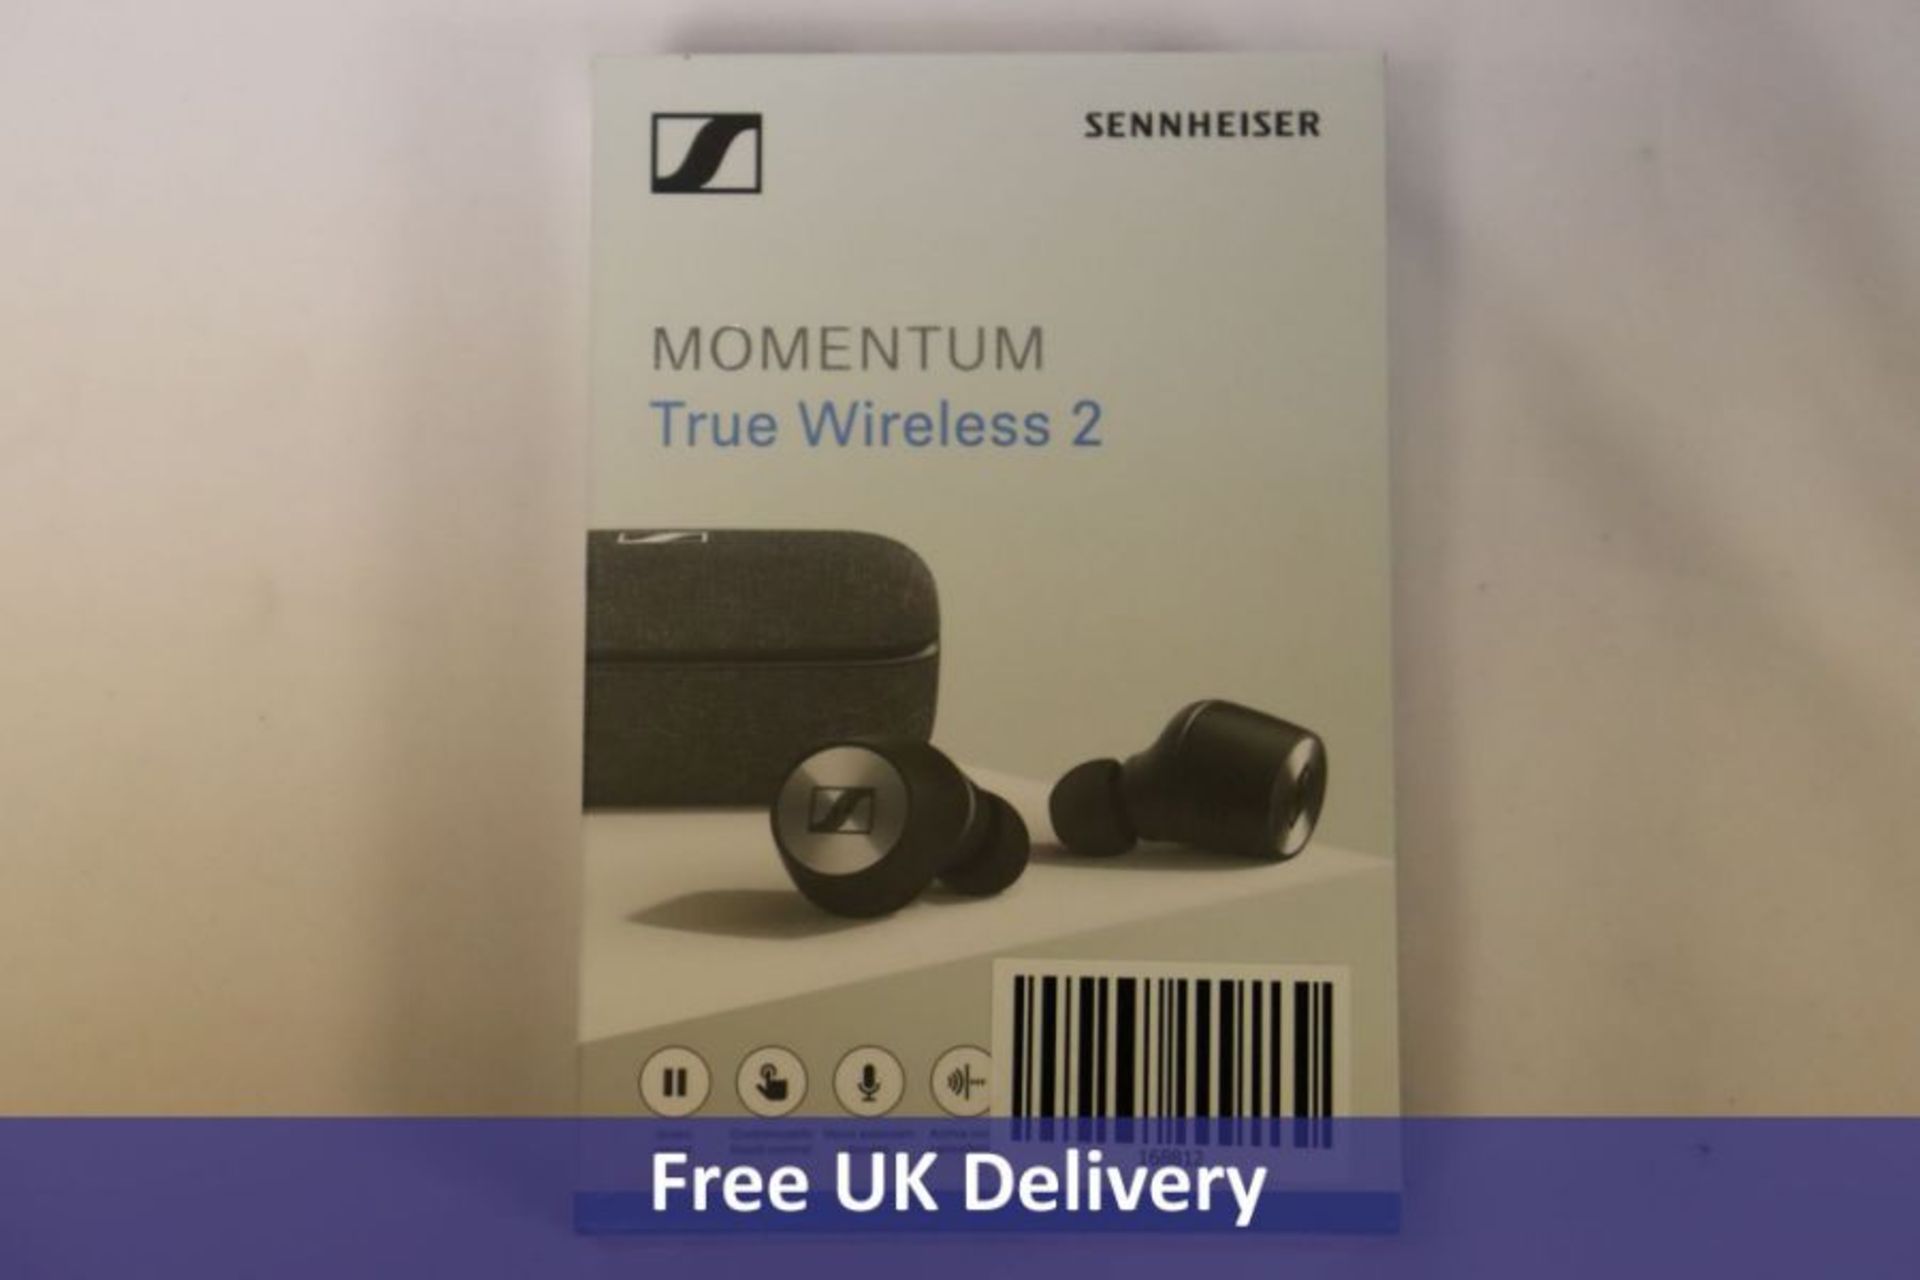 Sennheiser Momentum True Wireless 2, Bluetooth Earbuds with Active Noise Cancellation, Black